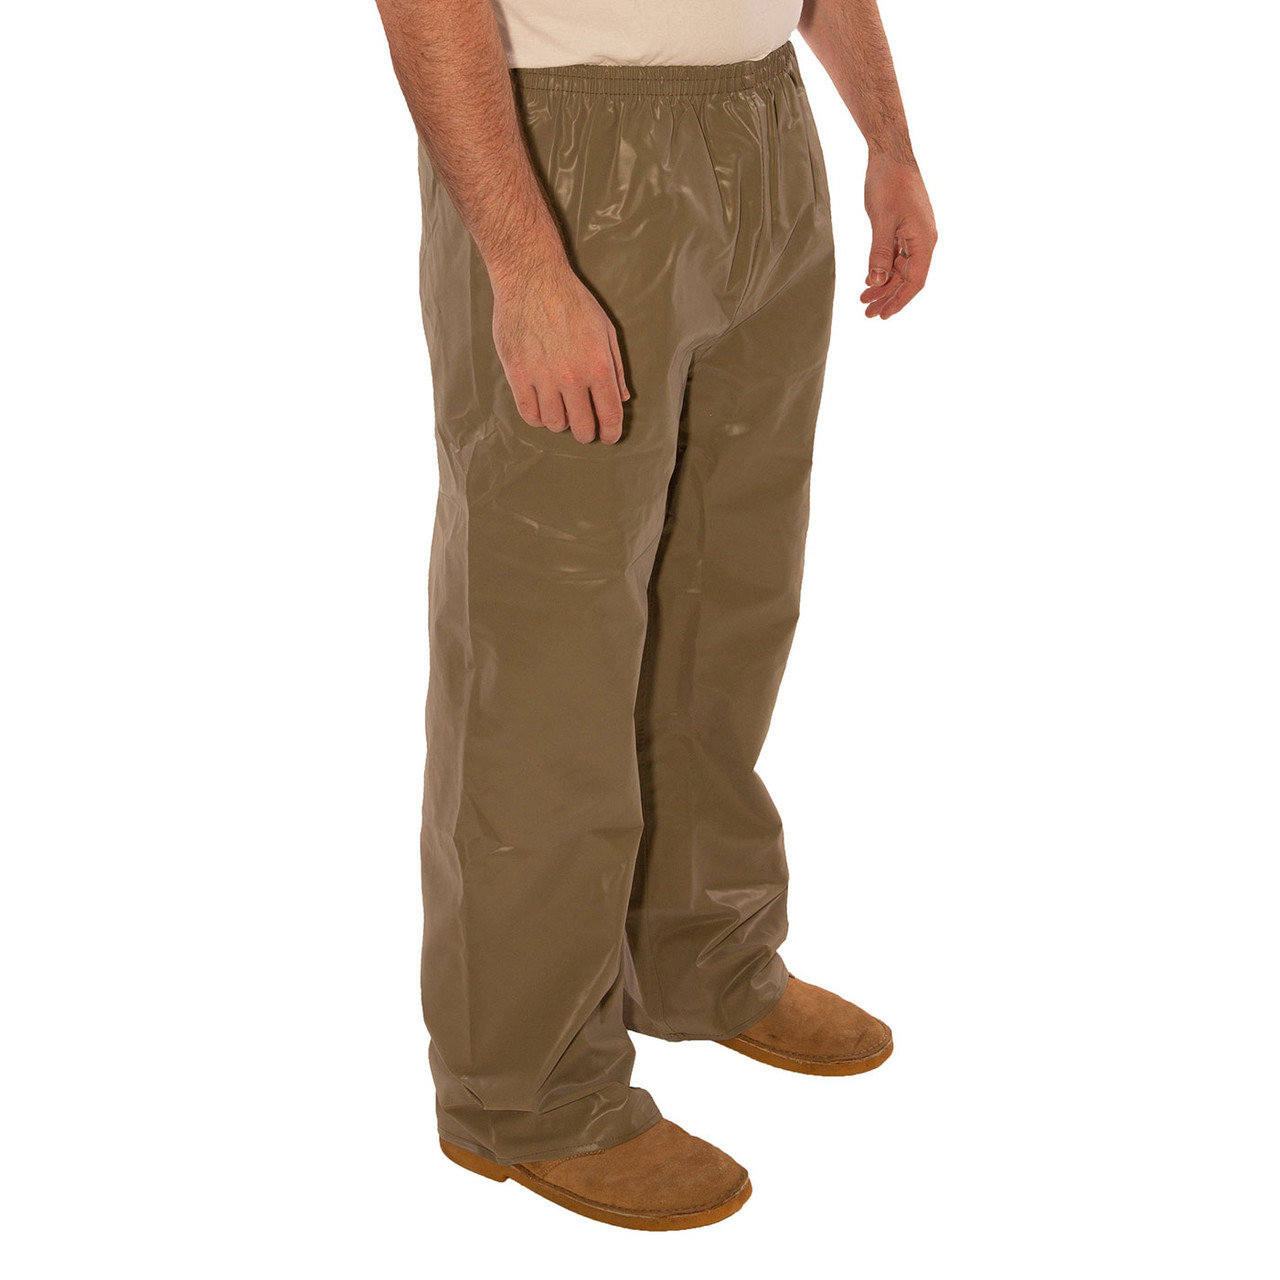 HQ ISSUE U.S. Military Style Ripstop BDU Pants, Olive Drab - 727504,  Tactical Pants & Shorts at Sportsman's Guide